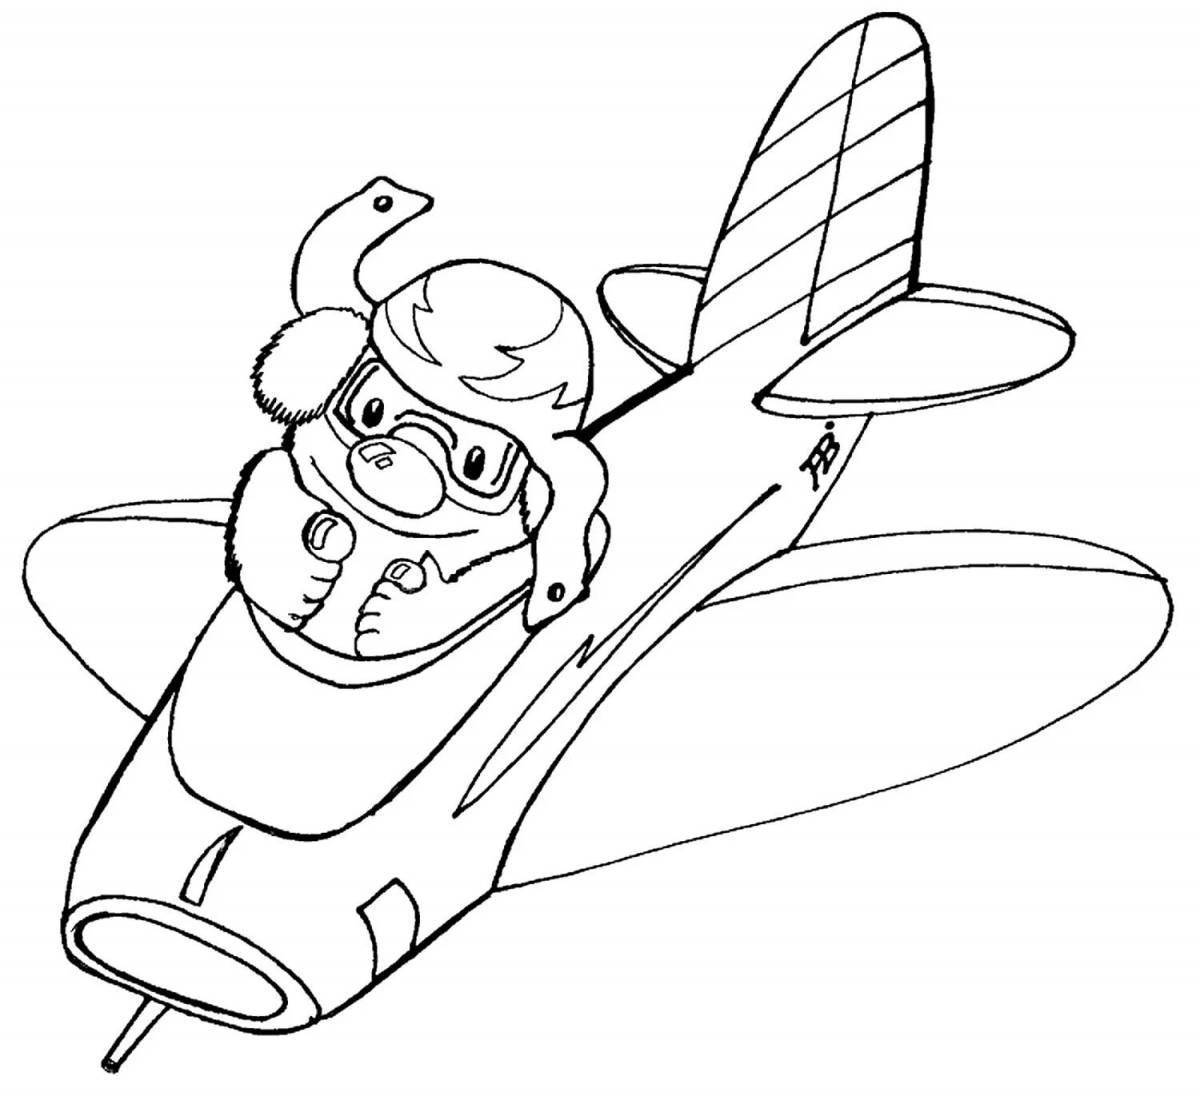 Lovely pilot coloring book for kids